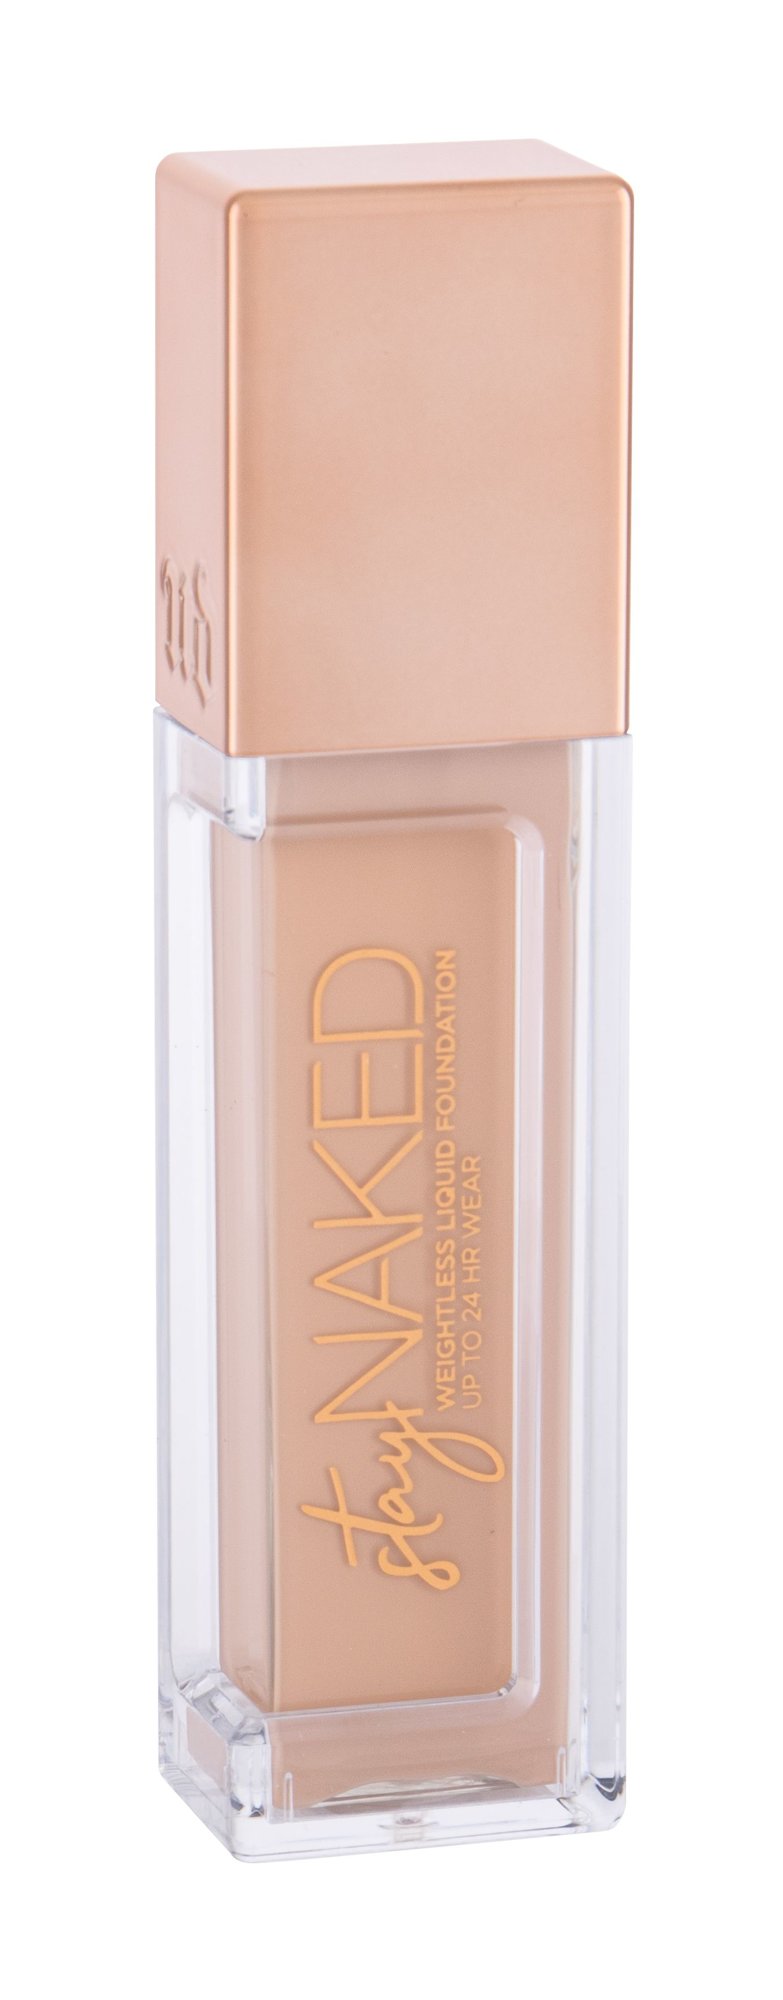 Urban Decay Stay Naked